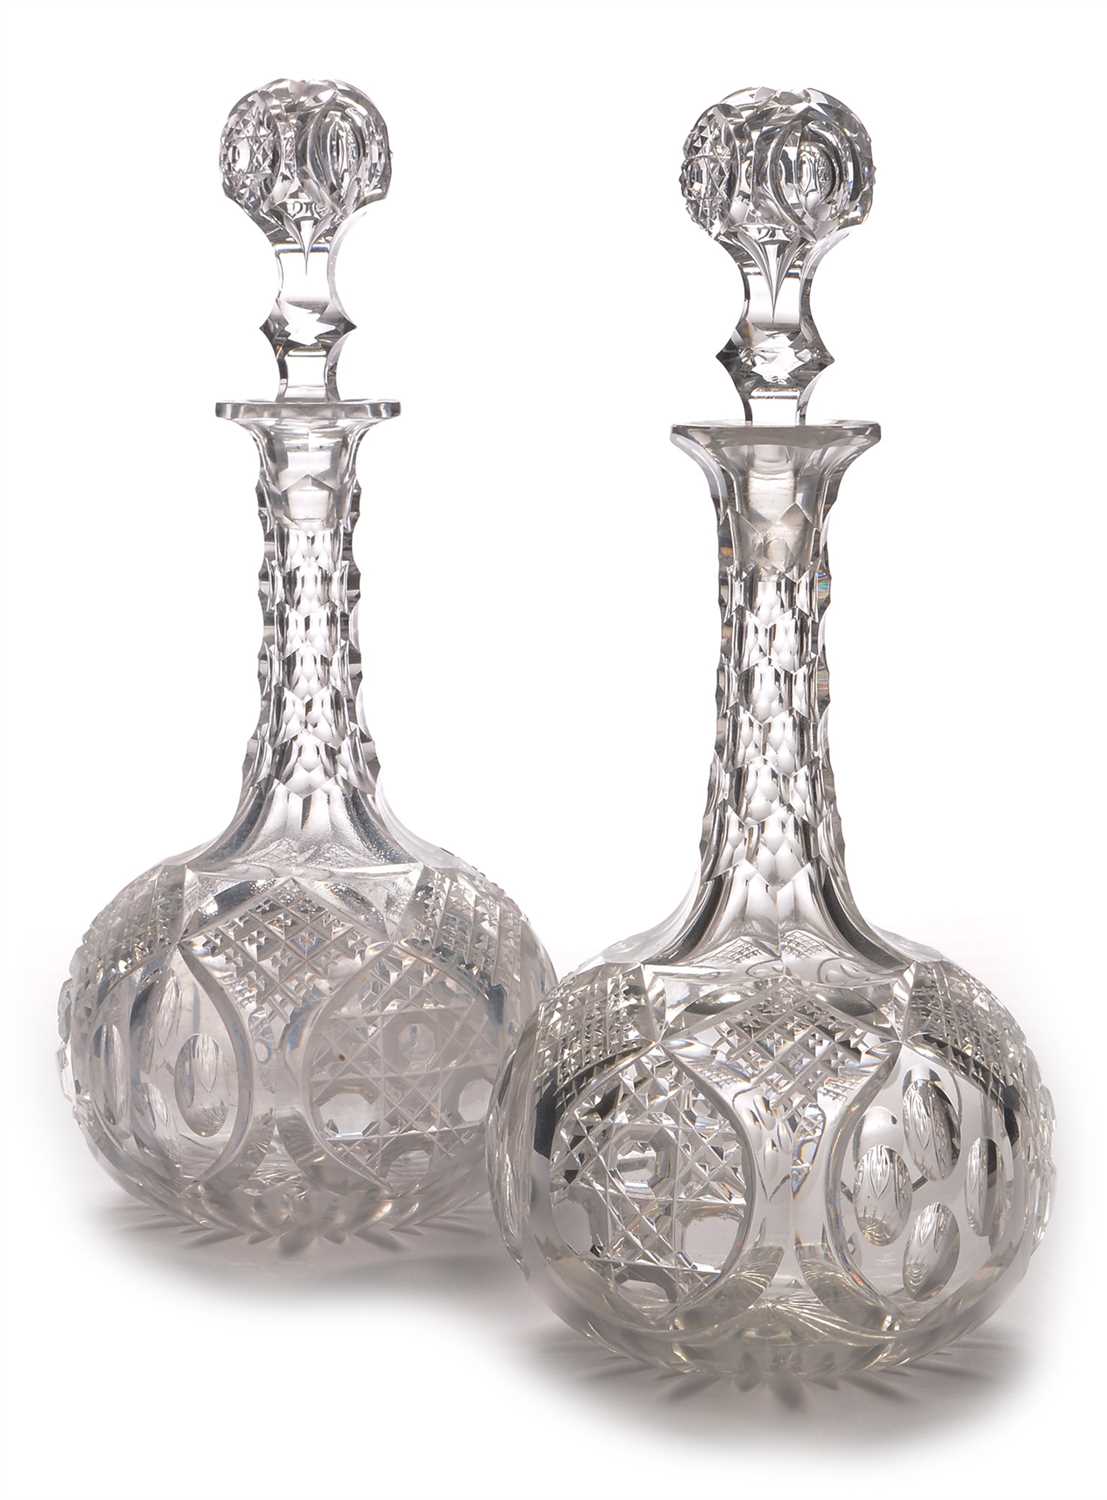 Lot 624 - Pair of globe and shaft decanters